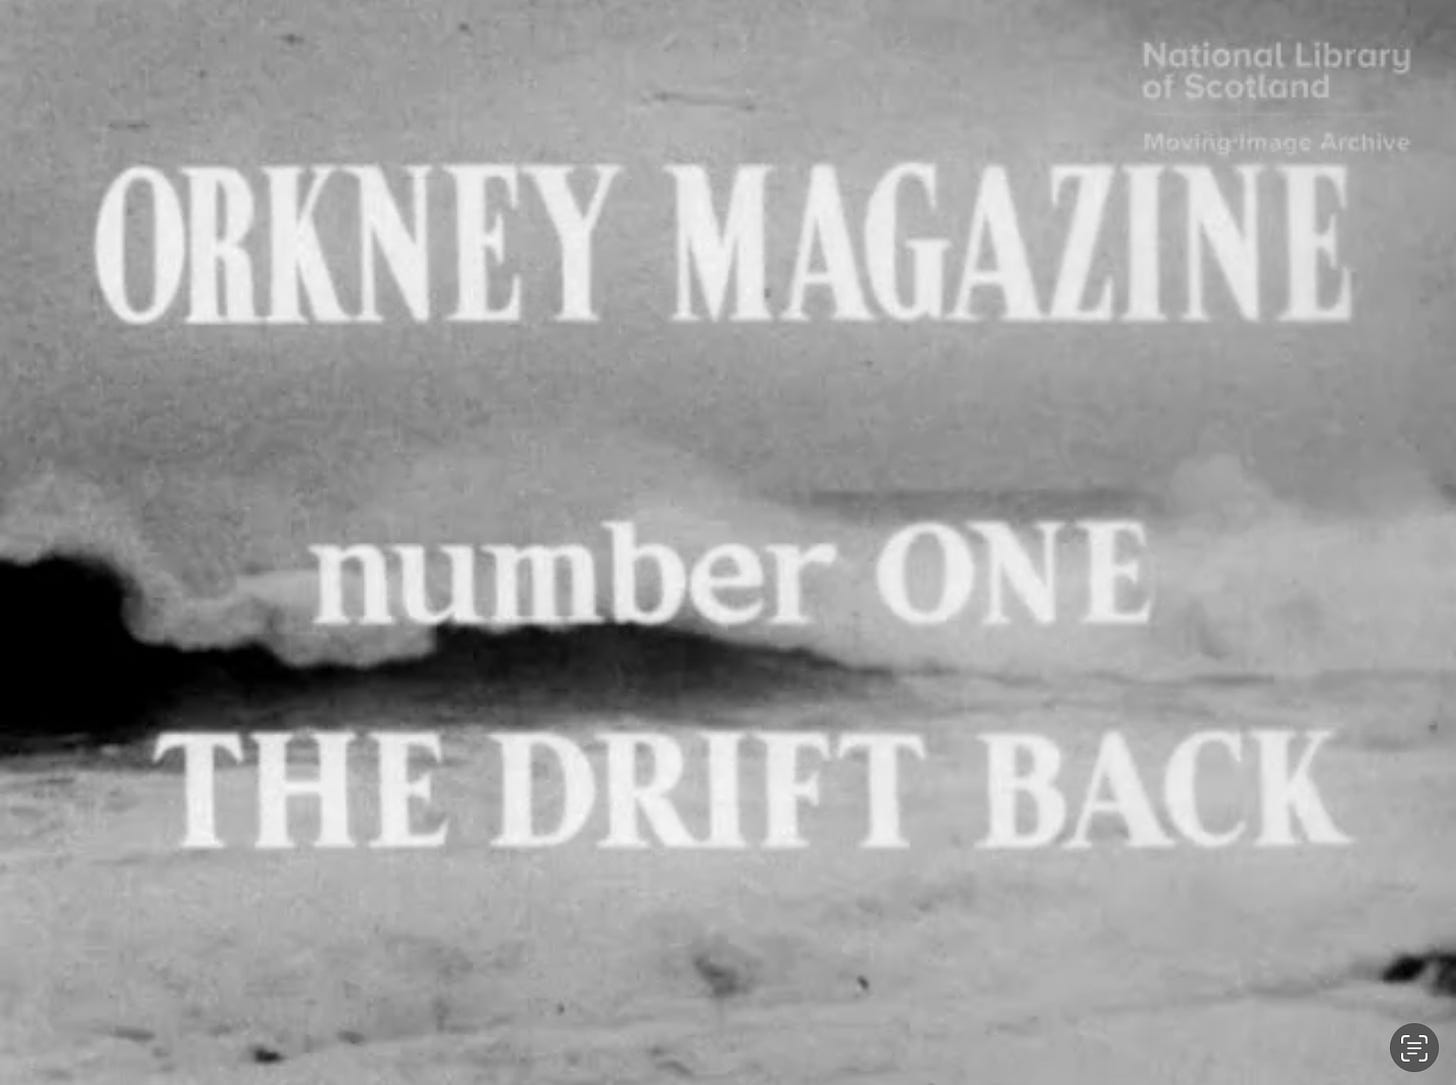 A very grainy title screen in monochrome, of a wave crashing. Text says ORKNEY MAGAZINE - Number ONE - THE DRIFT BACK